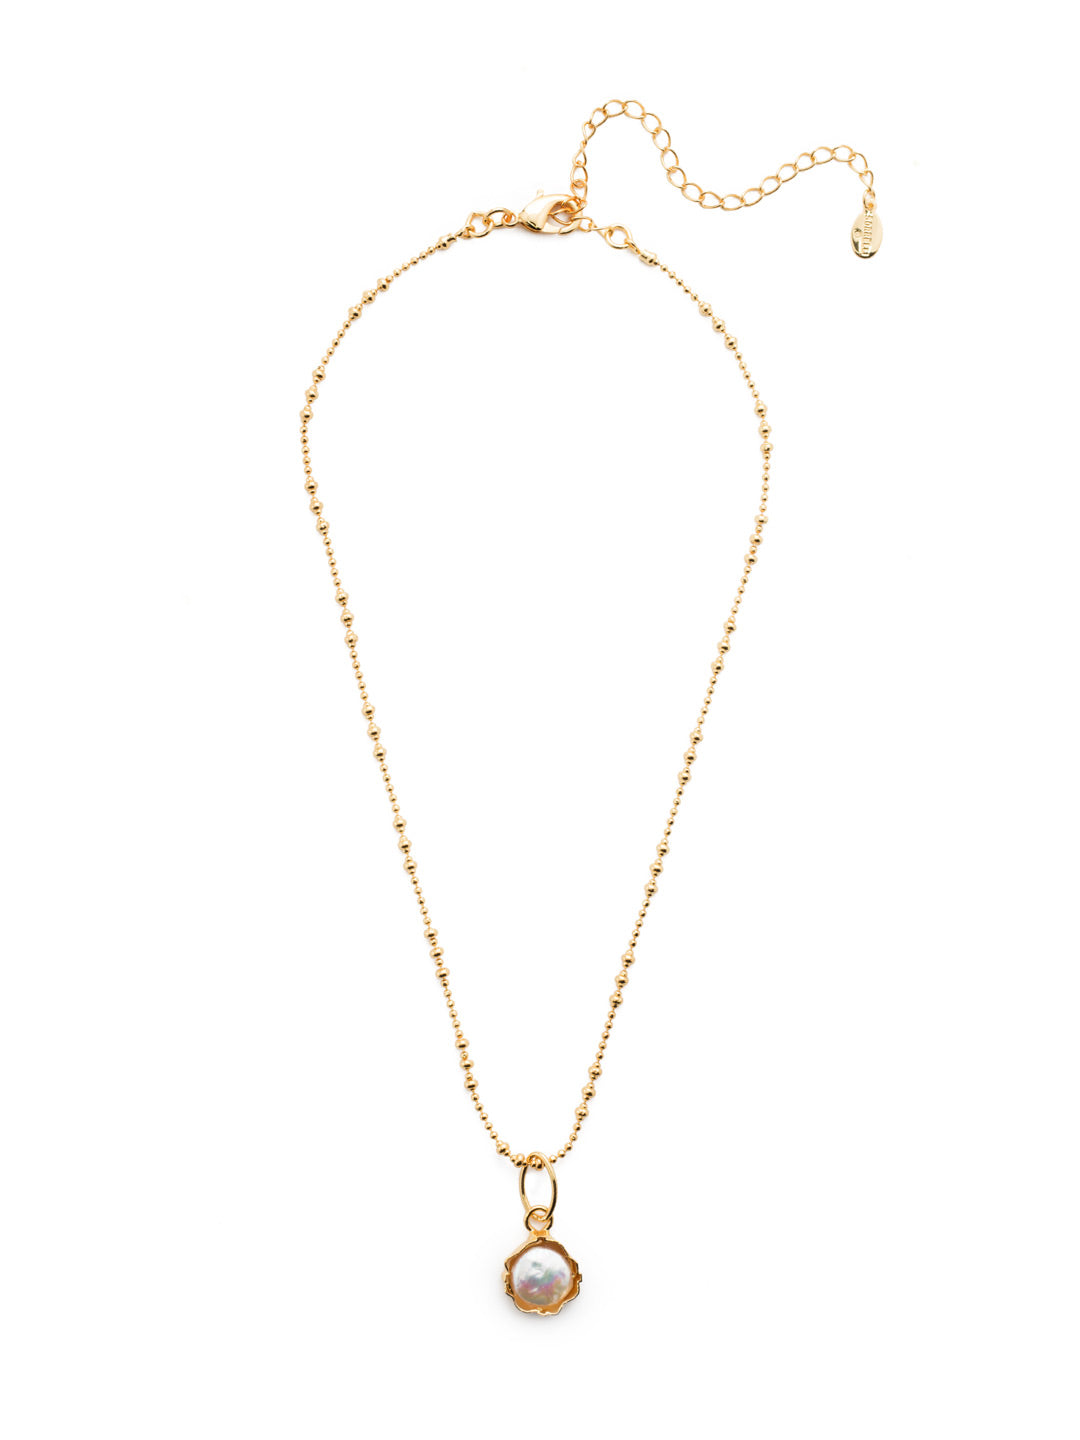 Rudy Pendant Necklace - 4NEU11BGMDP - <p>Looking for a signature necklace to add to your collection? Our Rudy Pendant Necklace is the perfect piece. With a delicate metal strand and a classic freshwater pearl, it's a great everyday item. From Sorrelli's Modern Pearl collection in our Bright Gold-tone finish.</p>